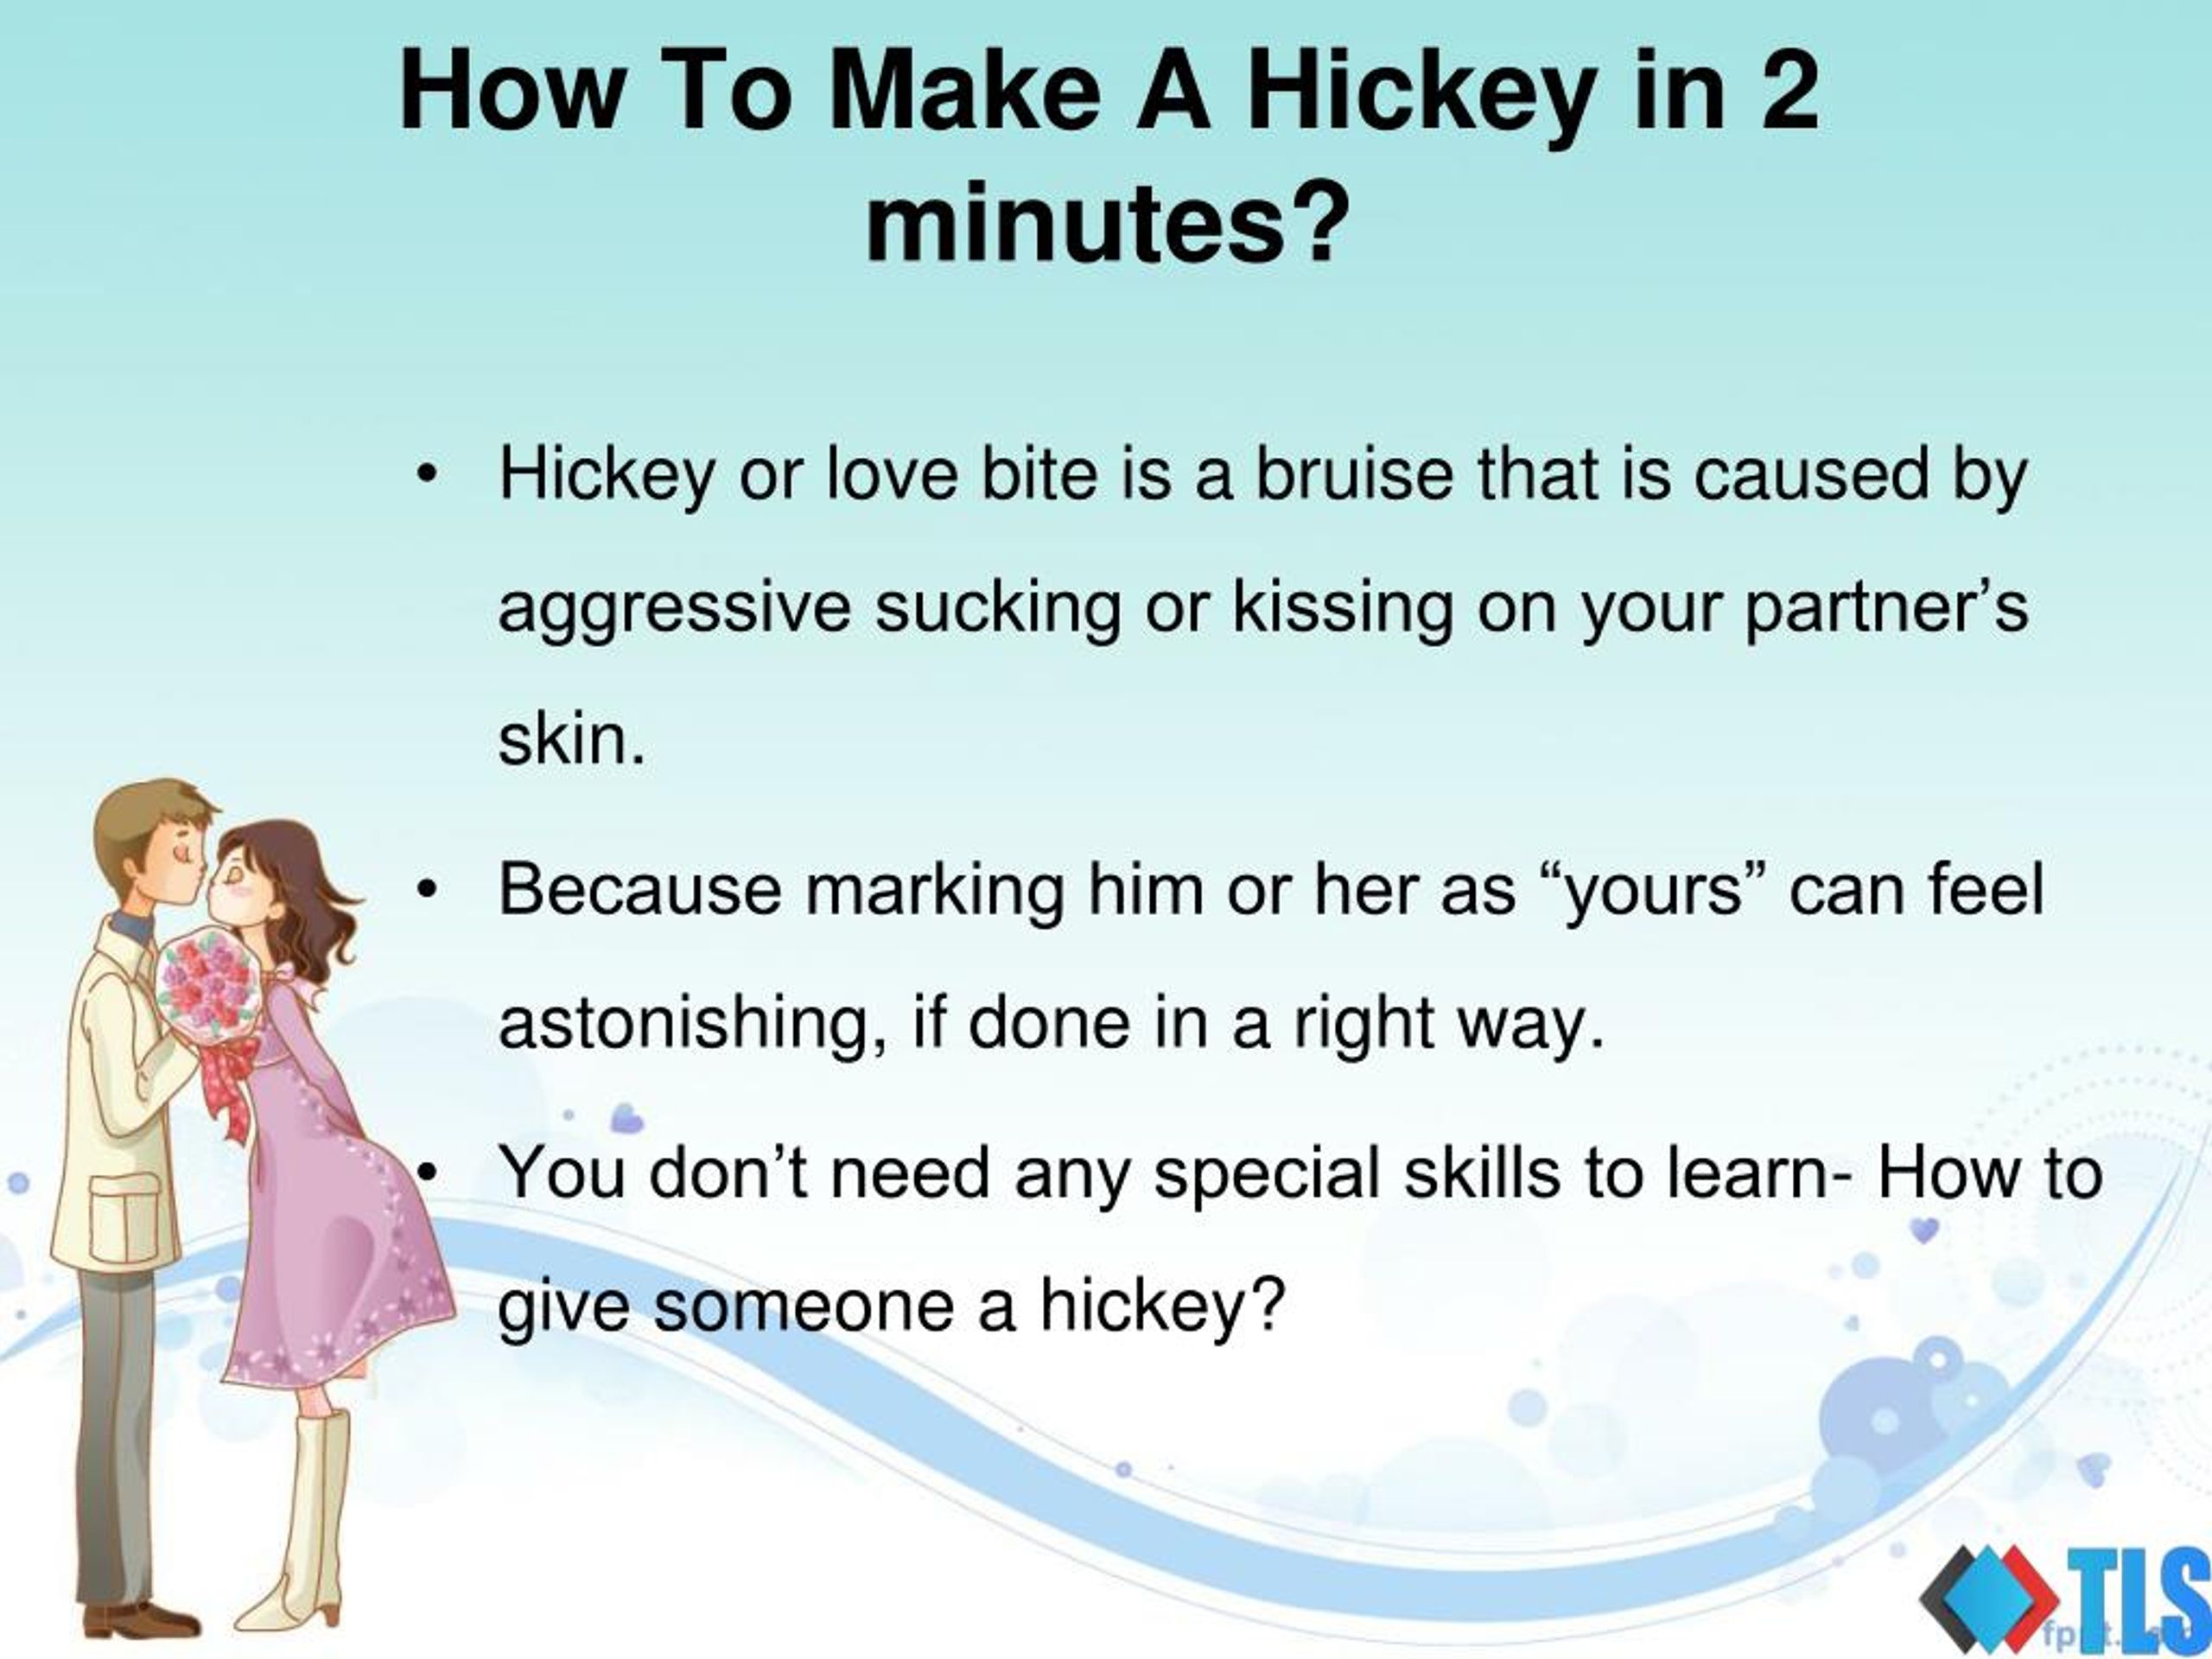 How To Make A Hickey in 2 minutes? 